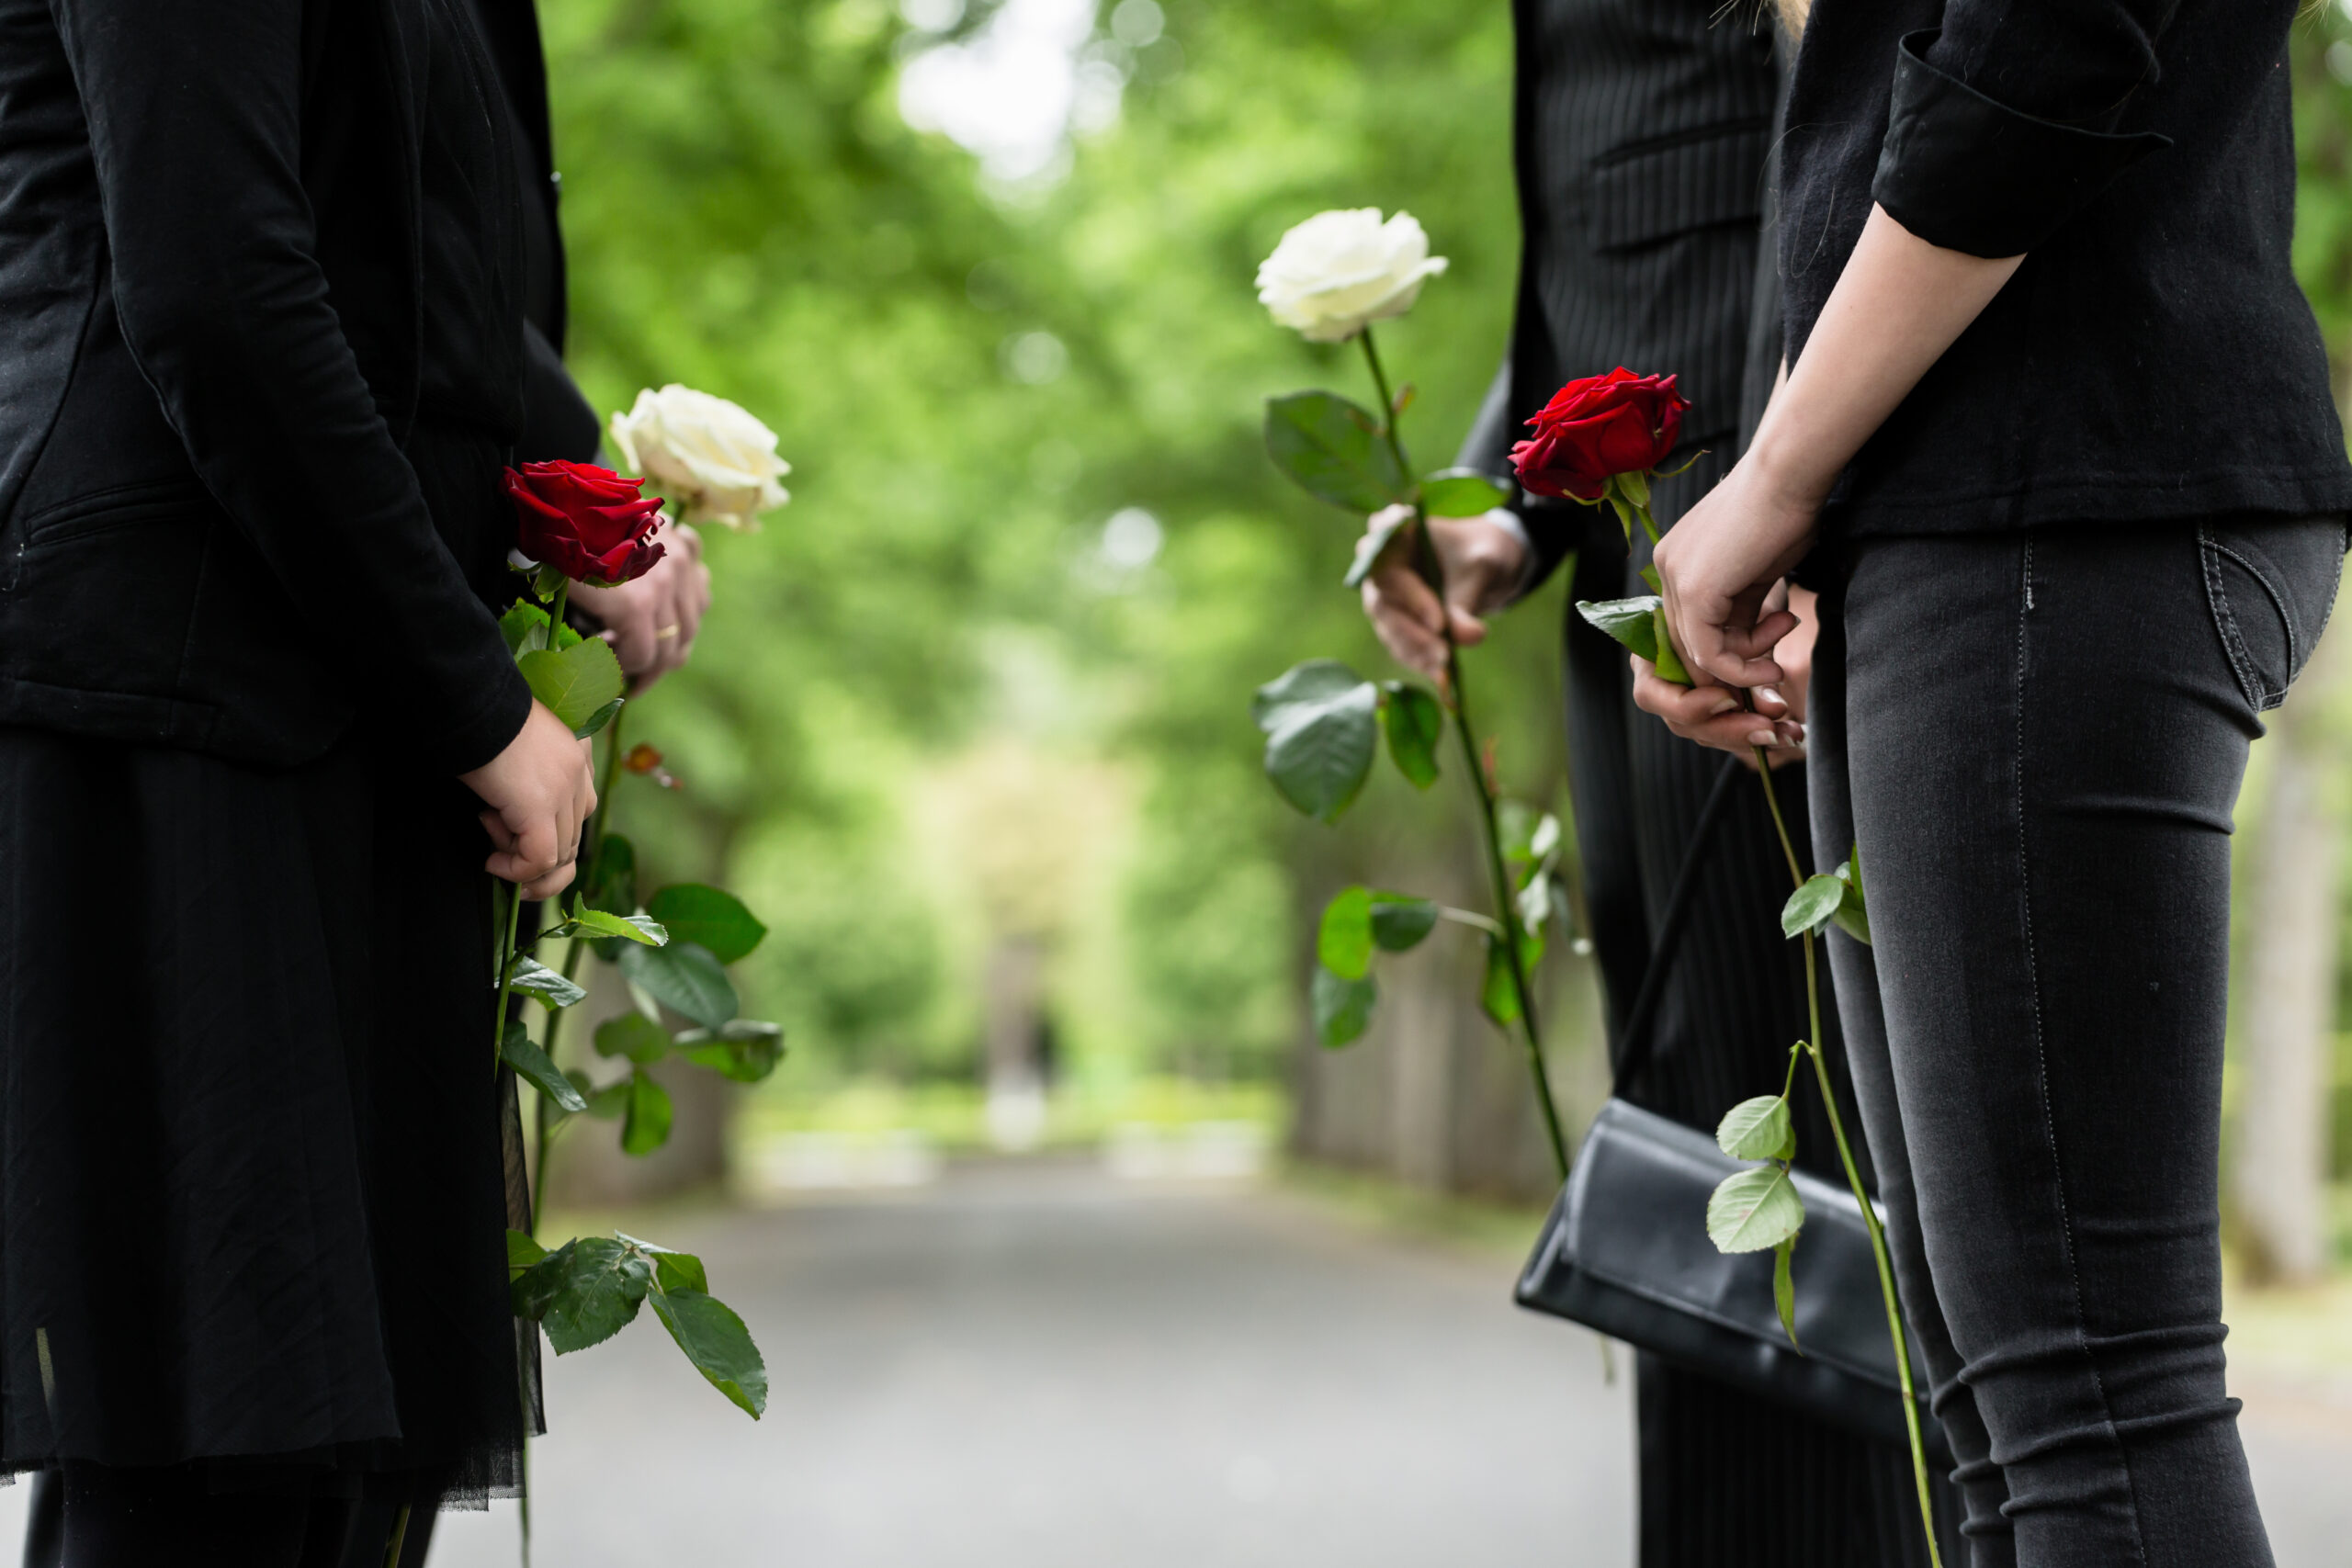 Wrongful death lawsuits in Georgia: Statute of limitations